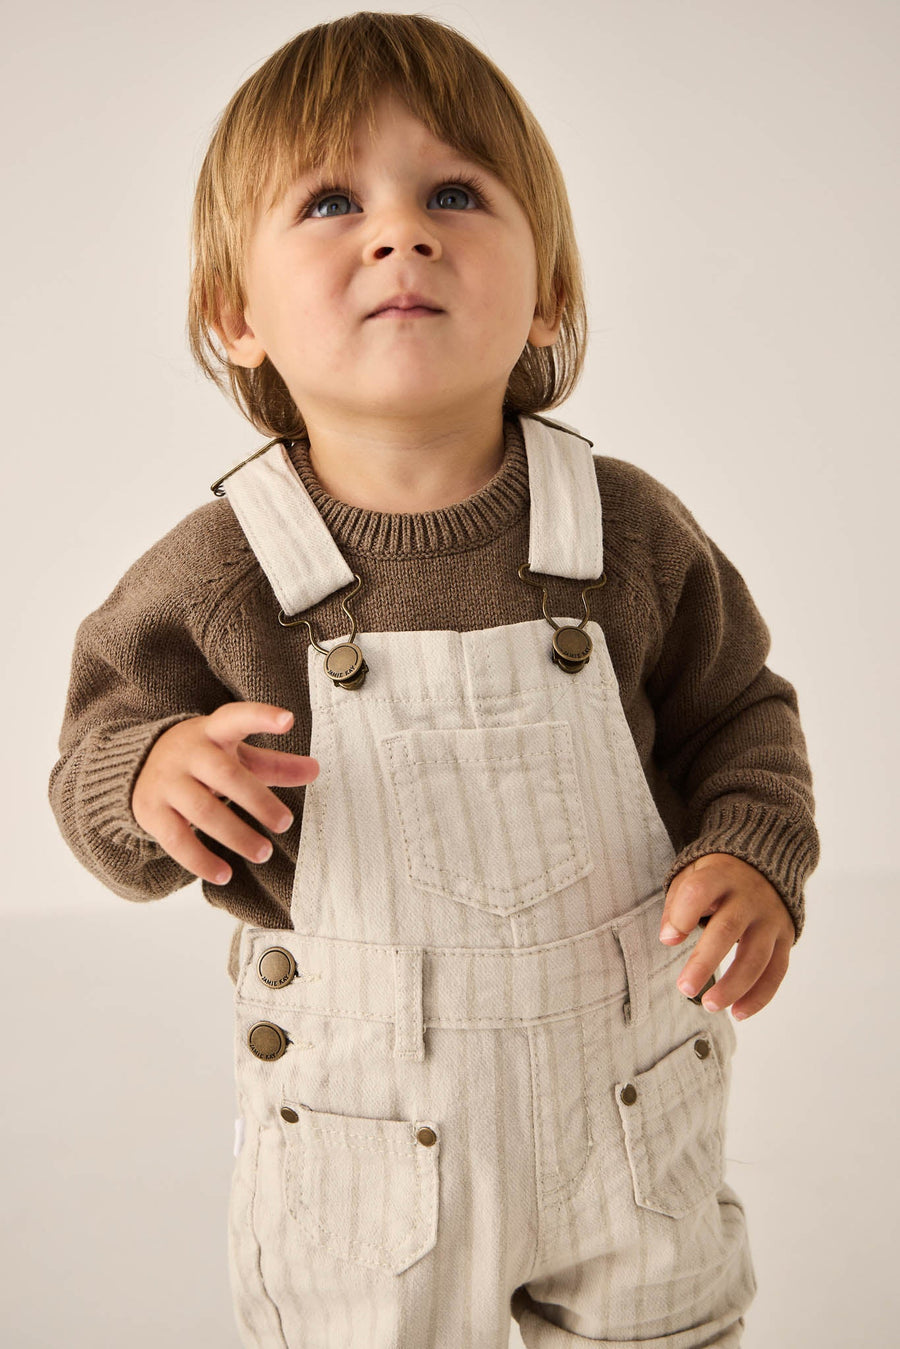 Arlo Overall - Cassava/Soft Clay Childrens Overall from Jamie Kay USA